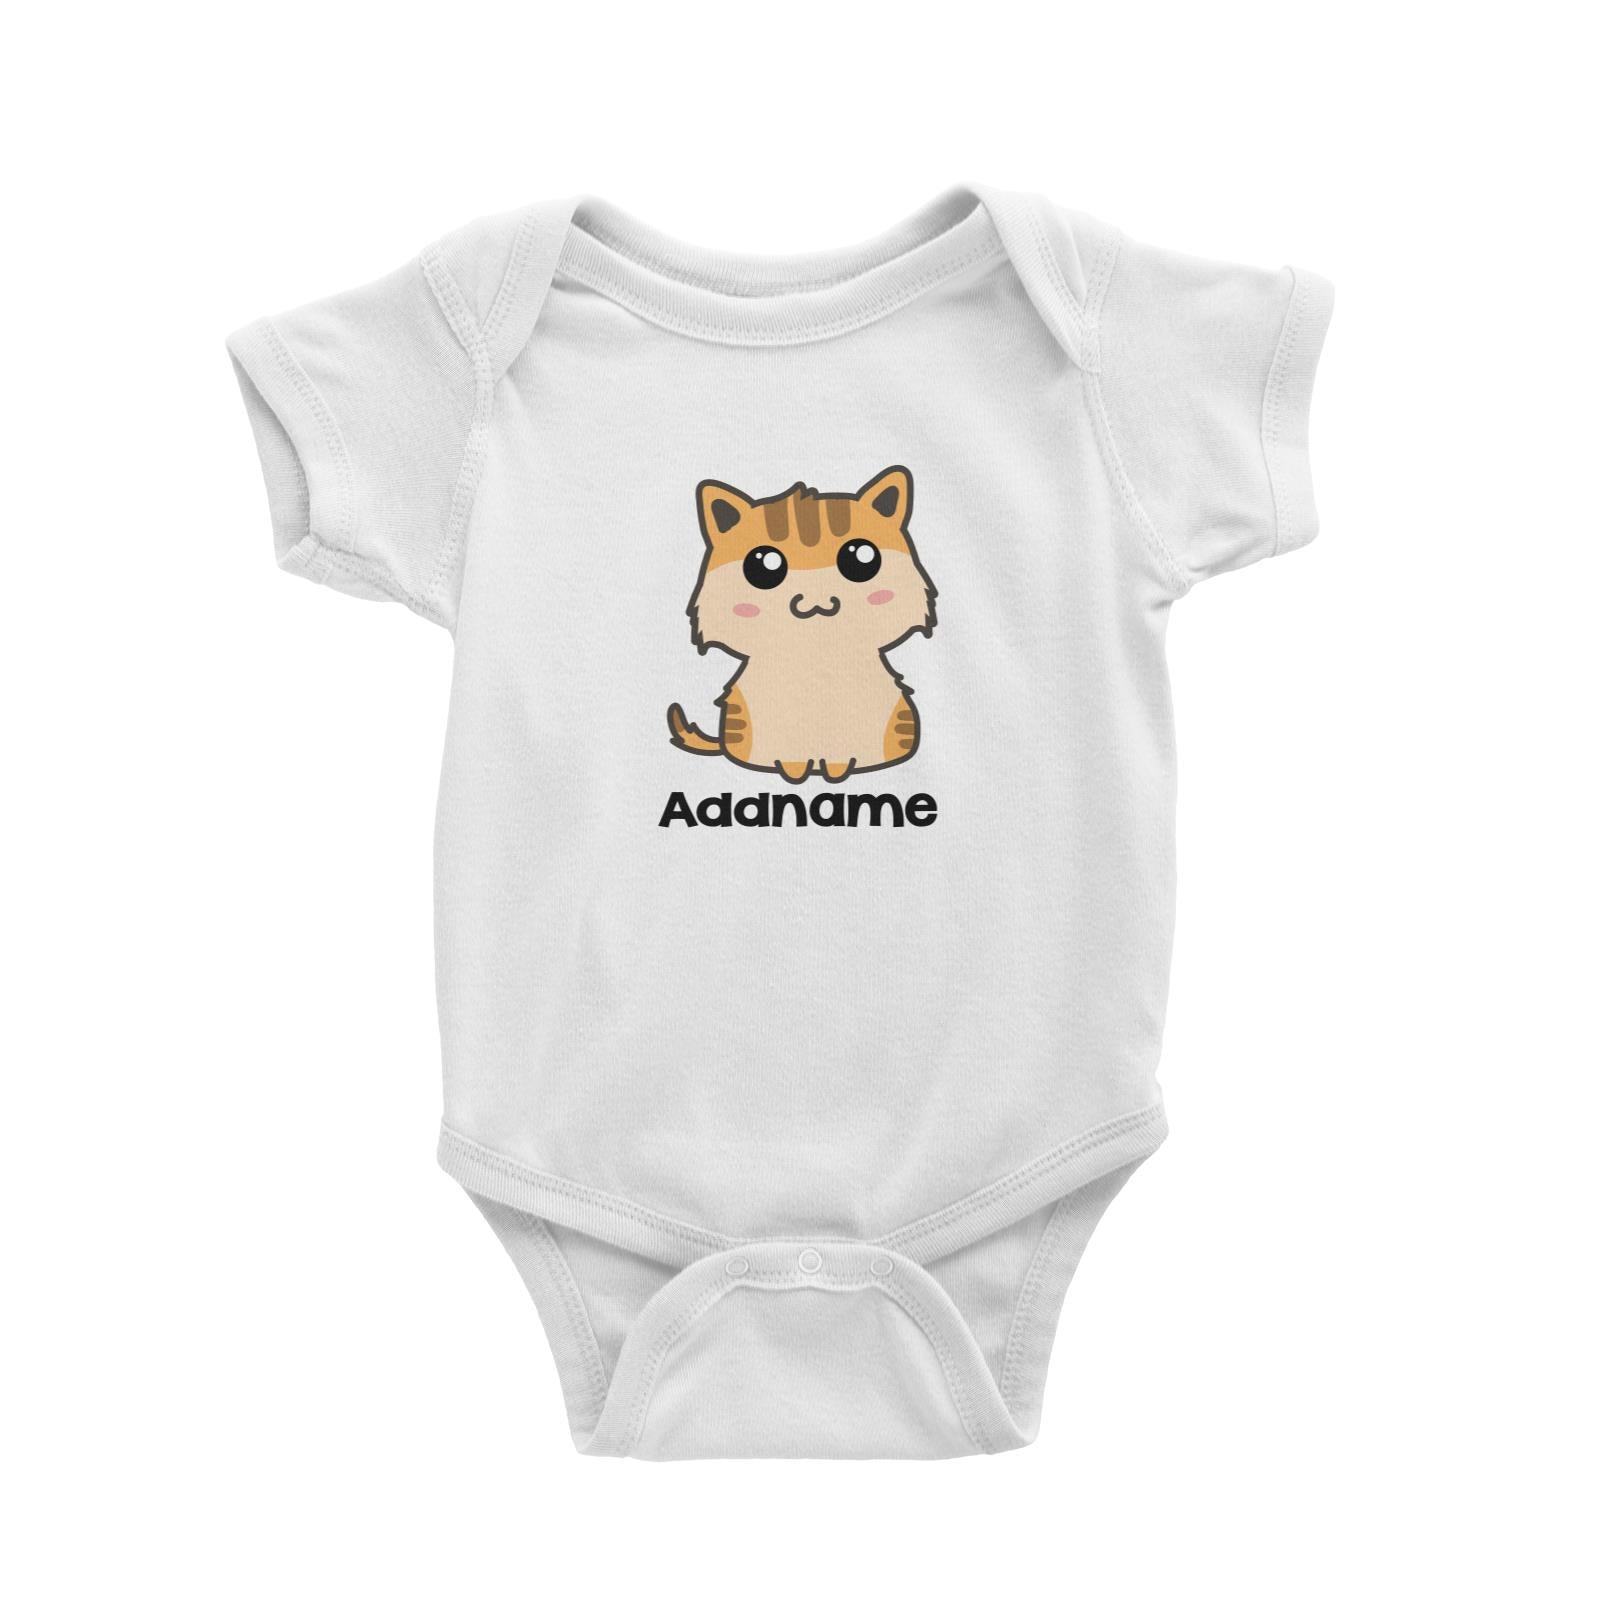 Drawn Adorable Cats Cream & Yellow Addname Baby Romper